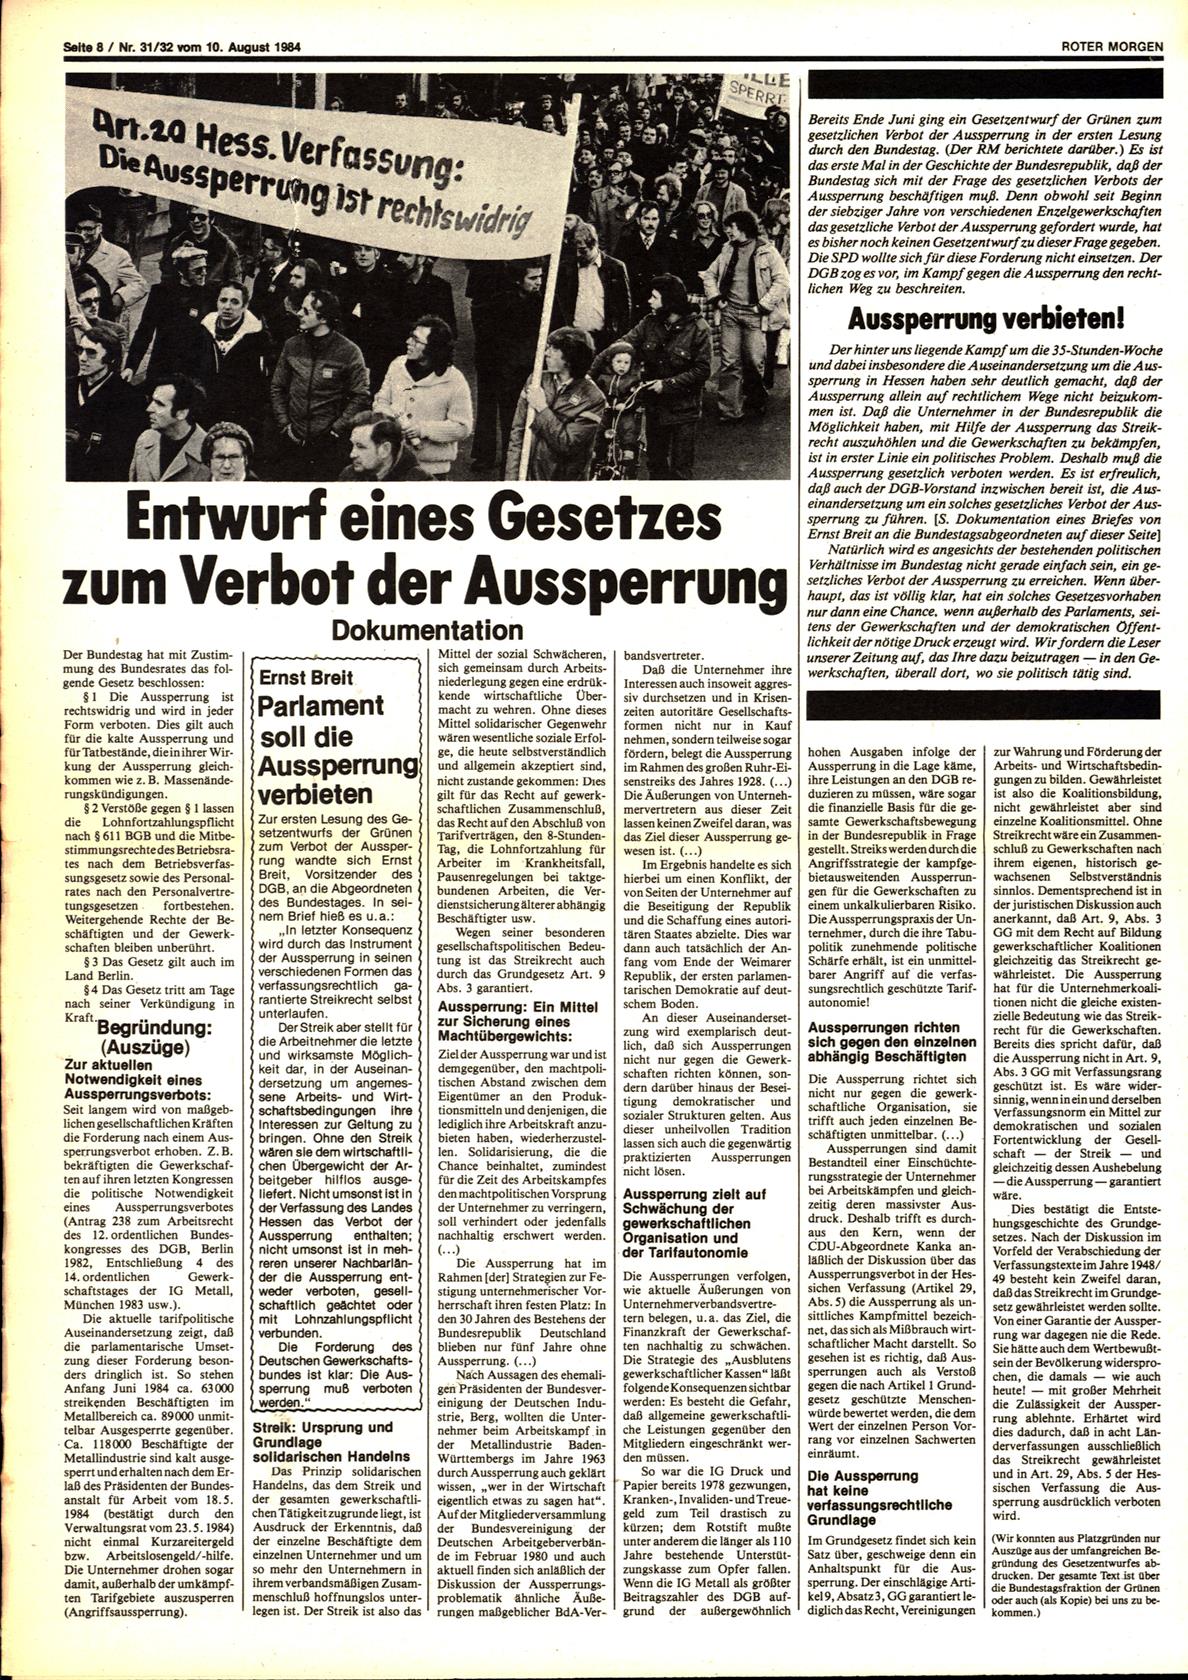 Roter Morgen, 18. Jg., 10. August 1984, Nr. 31/32, Seite 8